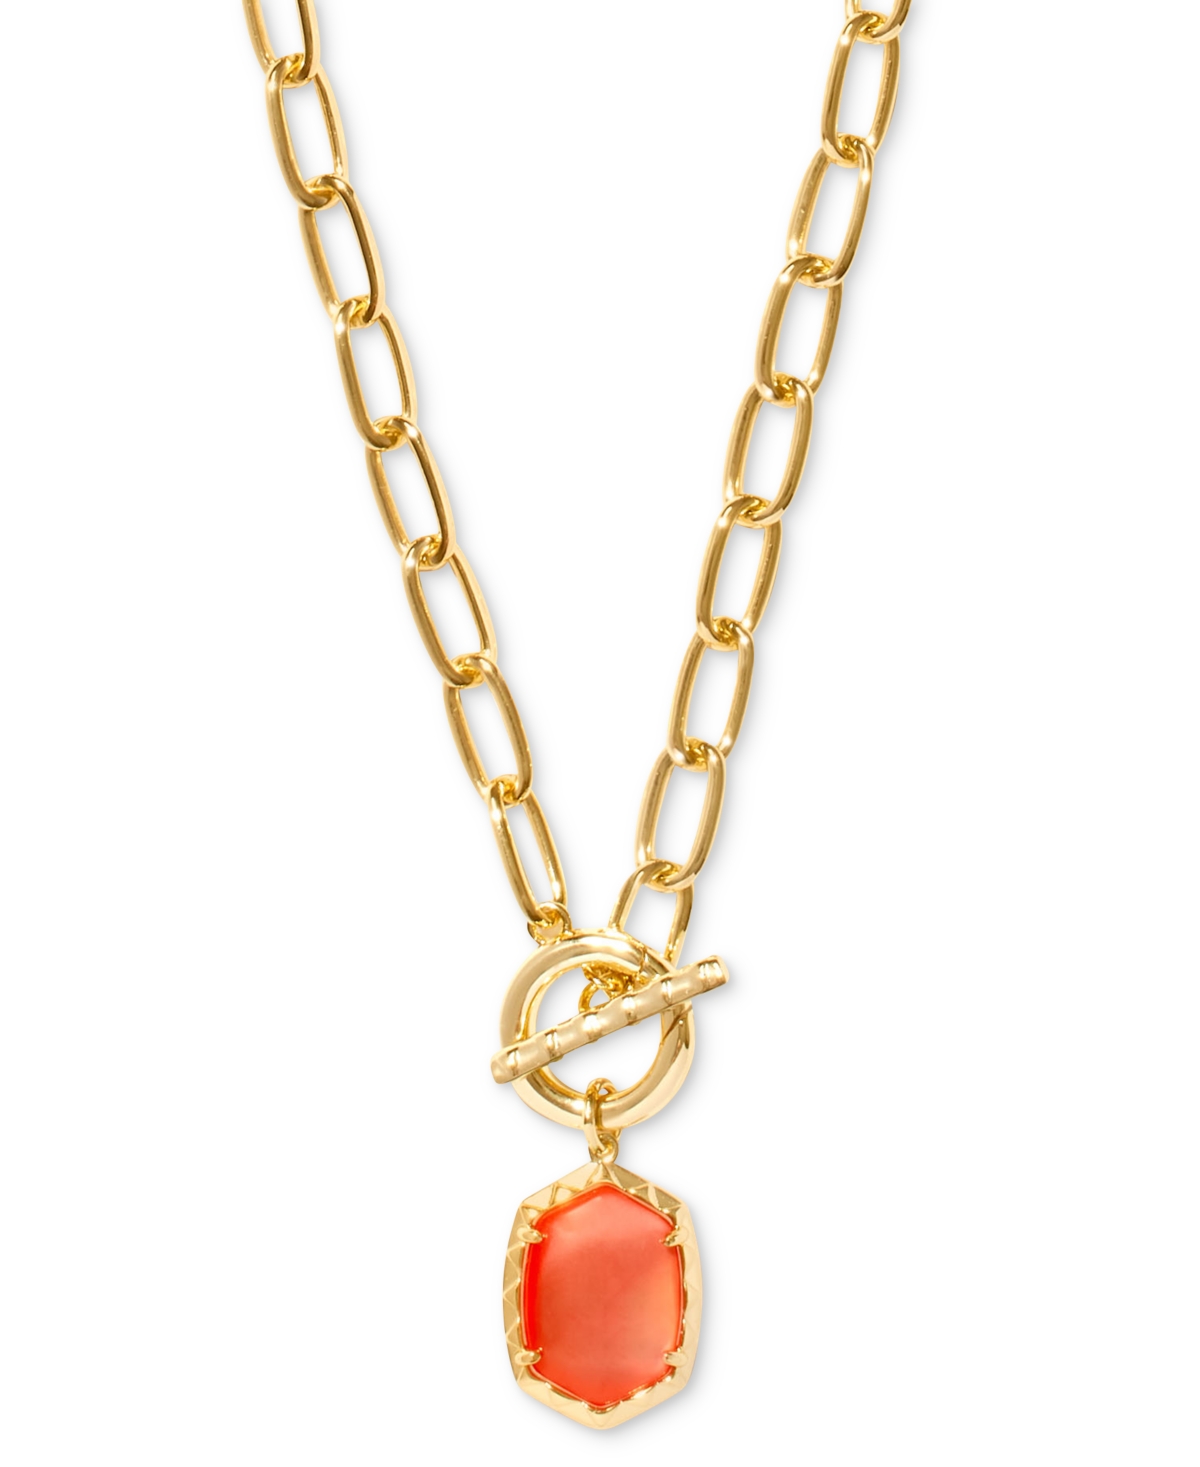 Kendra Scott 14k Gold-plated Stone 18" Pendant Necklace In Coral Pink Mother Of Pearl